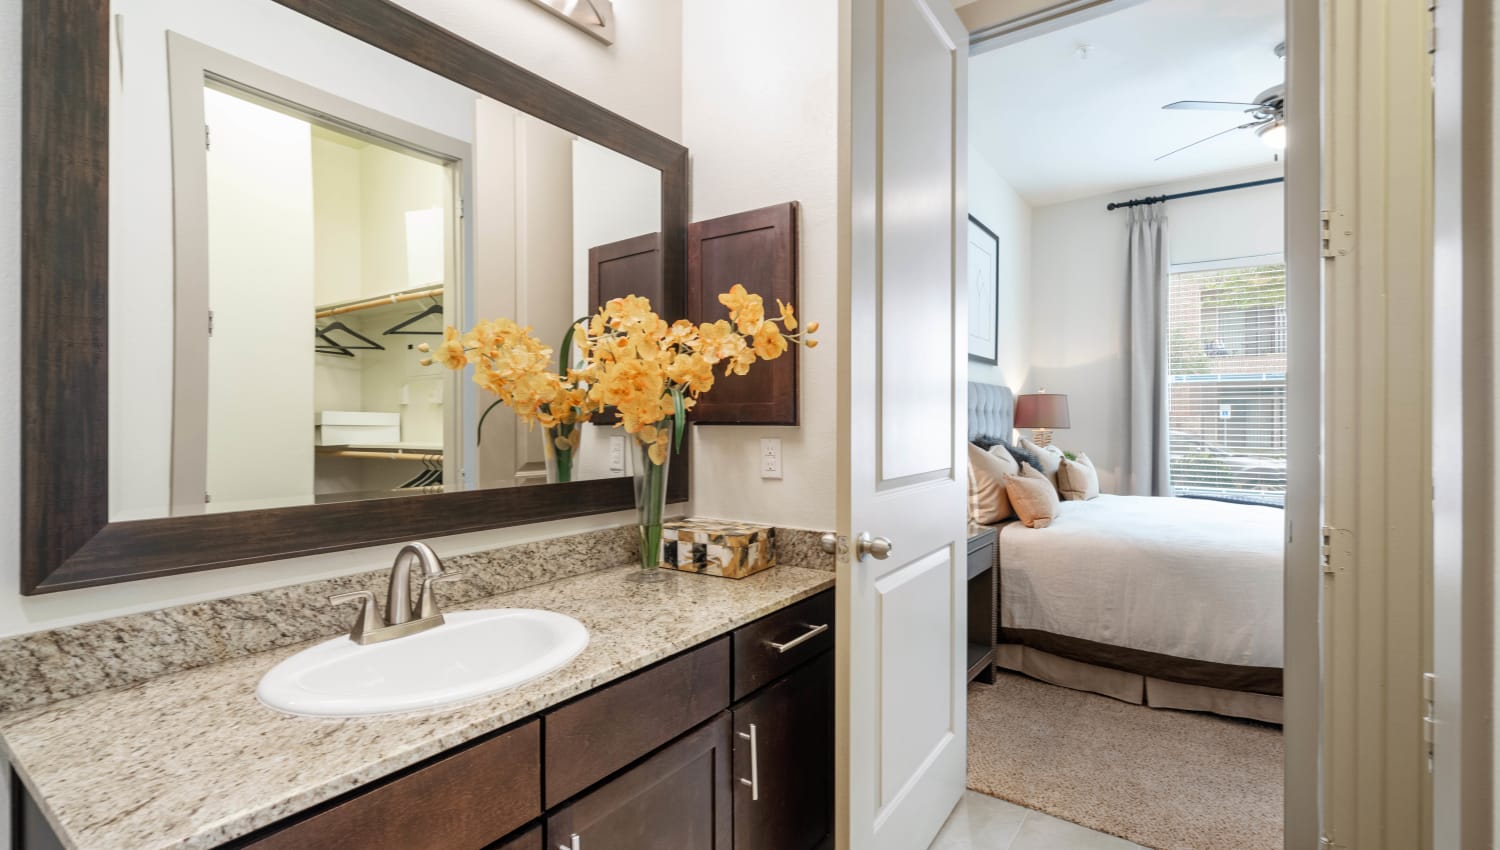 Oversized vanity mirror and a granite countertop in a model home's primary bathroom at Olympus Sierra Pines in The Woodlands, Texas